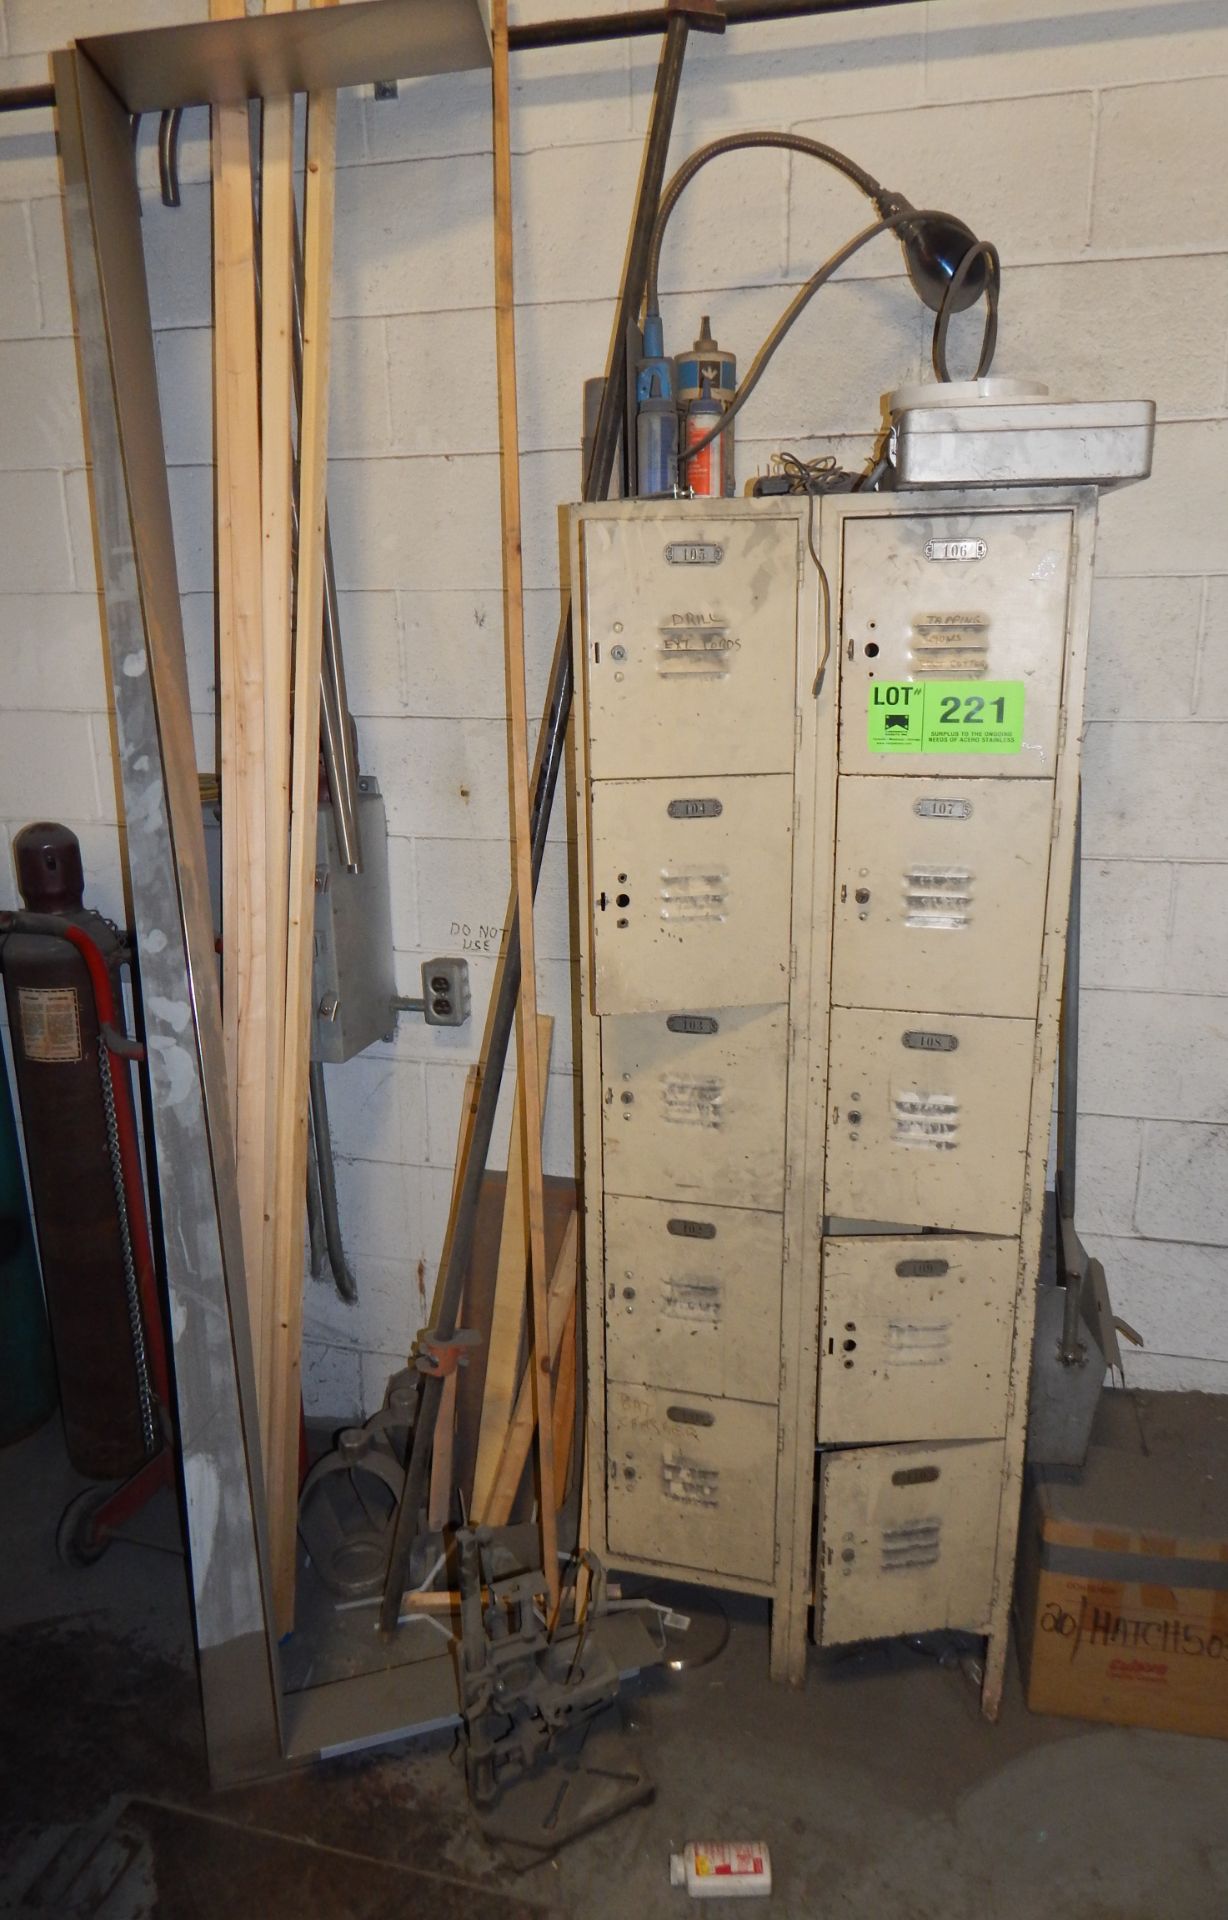 LOT/ LOCKER AND CONTENTS